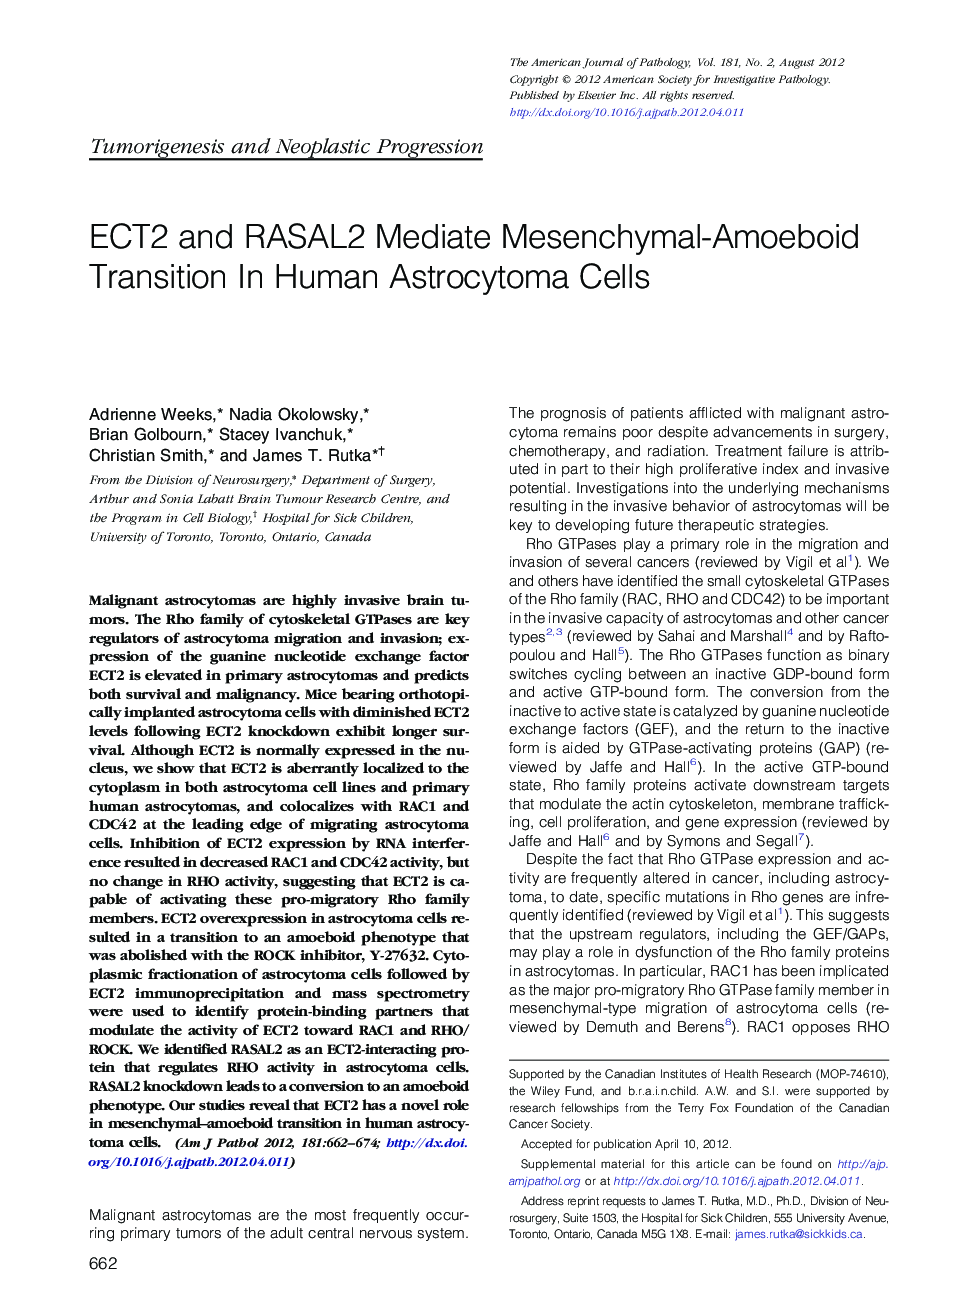 ECT2 and RASAL2 Mediate Mesenchymal-Amoeboid Transition In Human Astrocytoma Cells